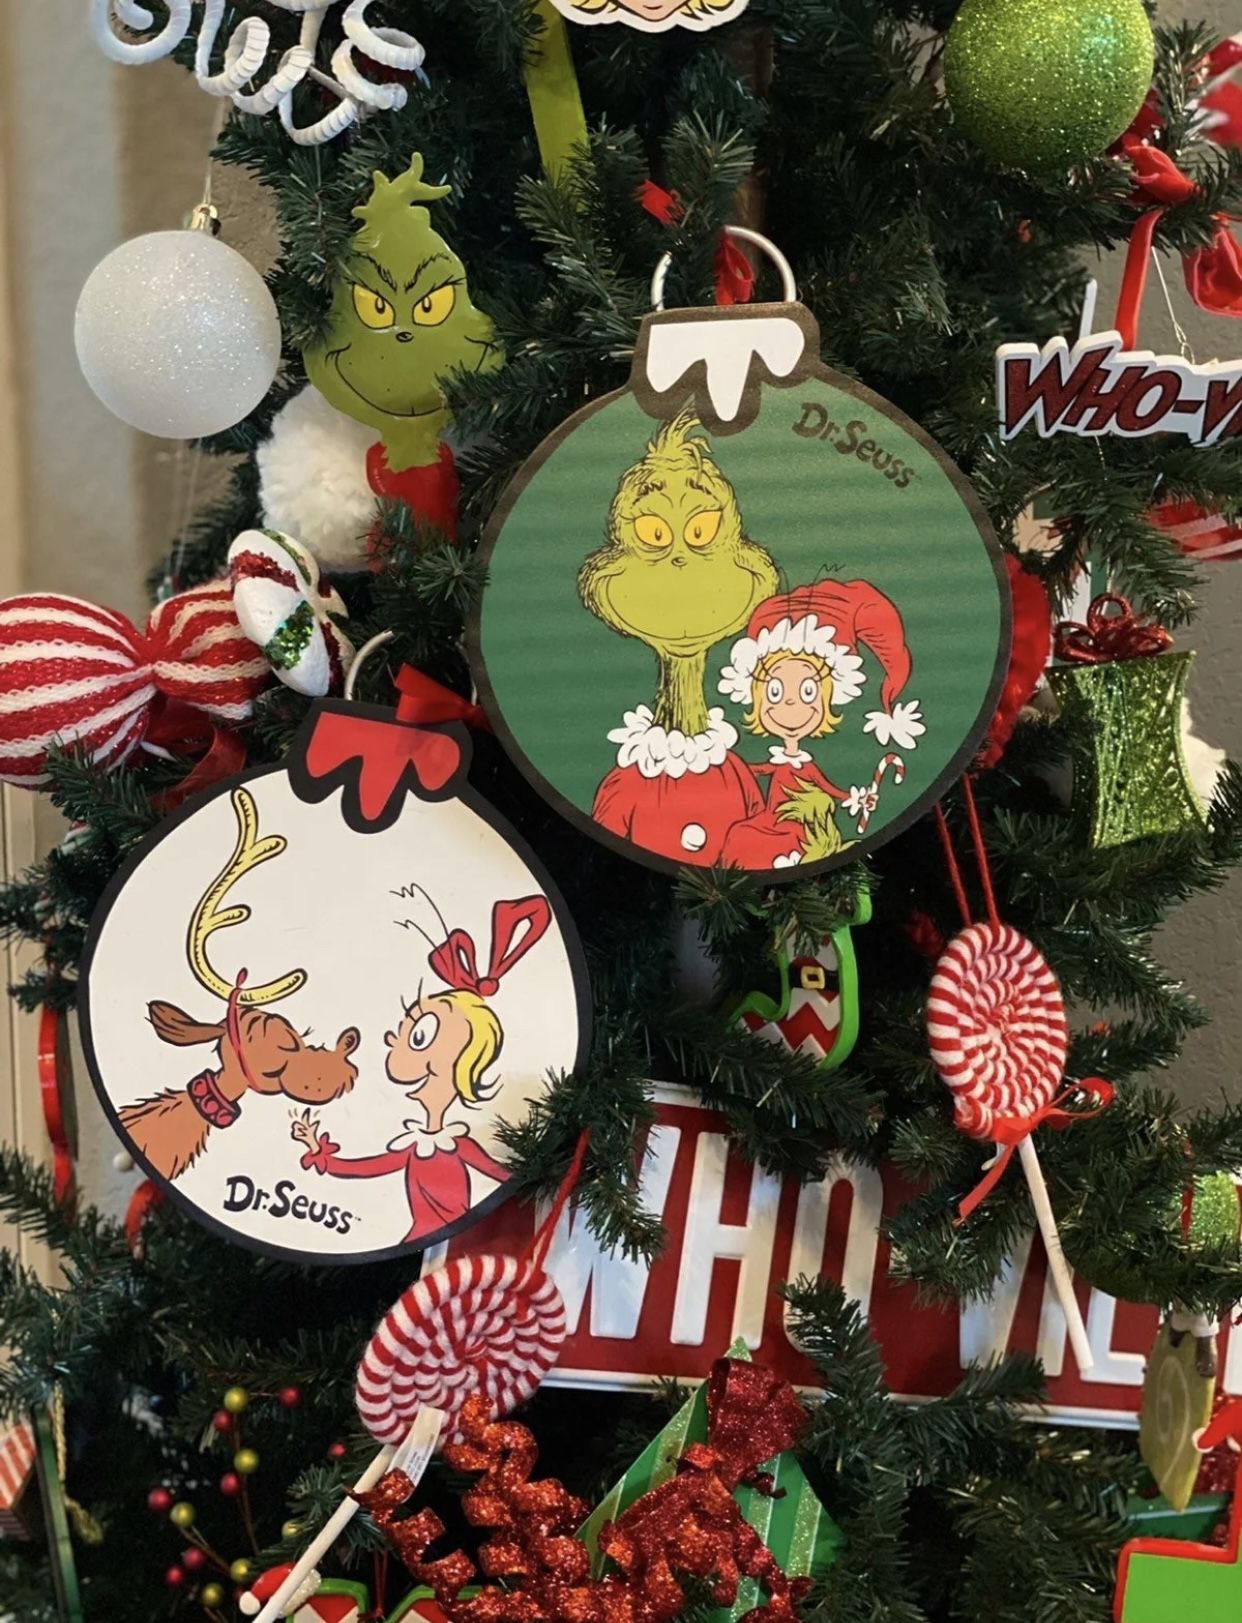 The grinch Large Wood Ornament Decor